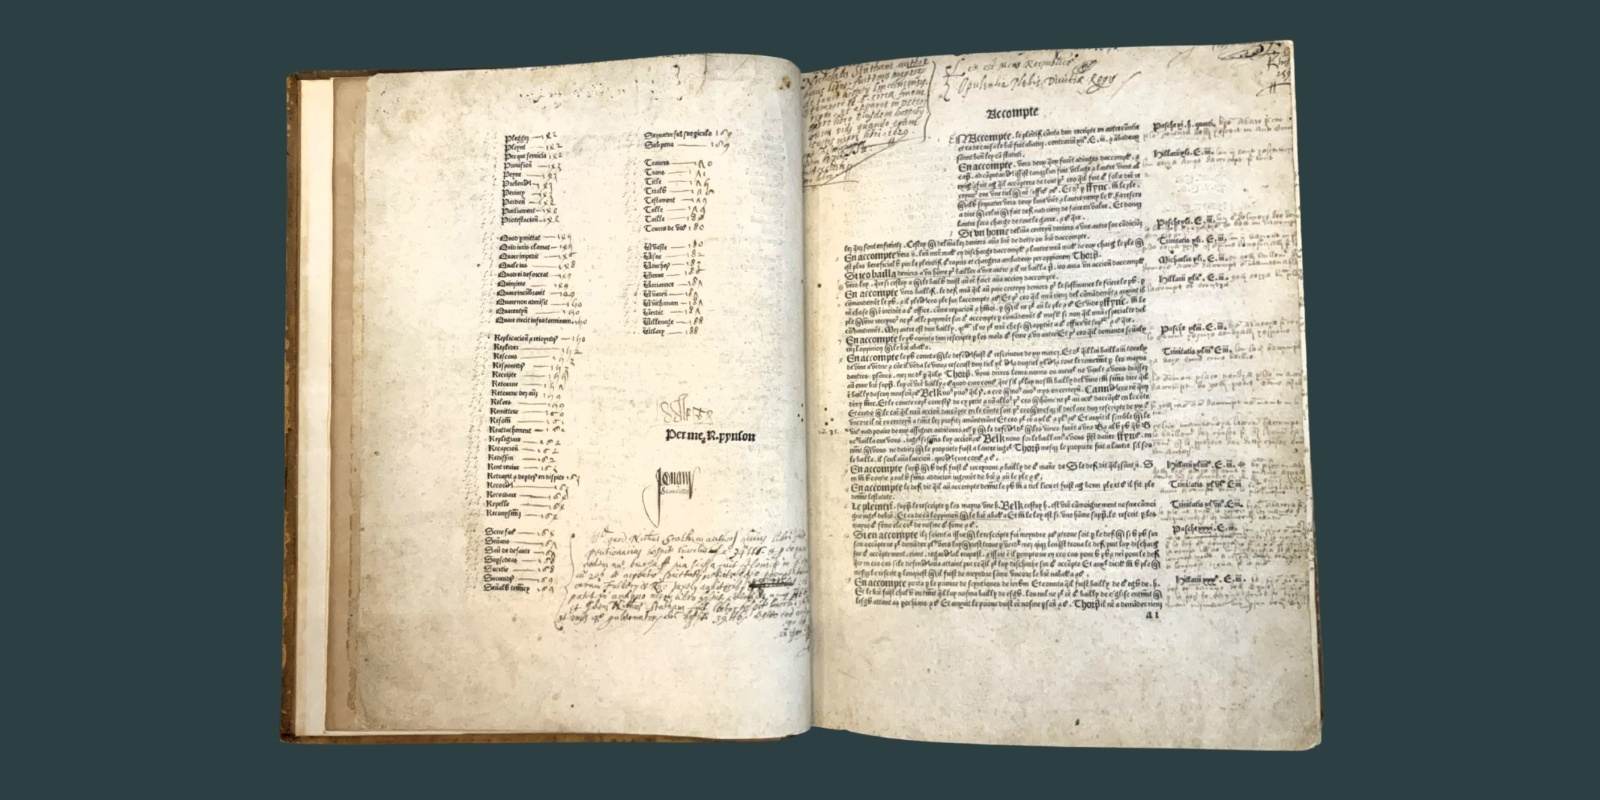 Banner image for The Oldest Book in the Supreme Court Library: Statham’s Abridgement (1491), and its place in law reporting today